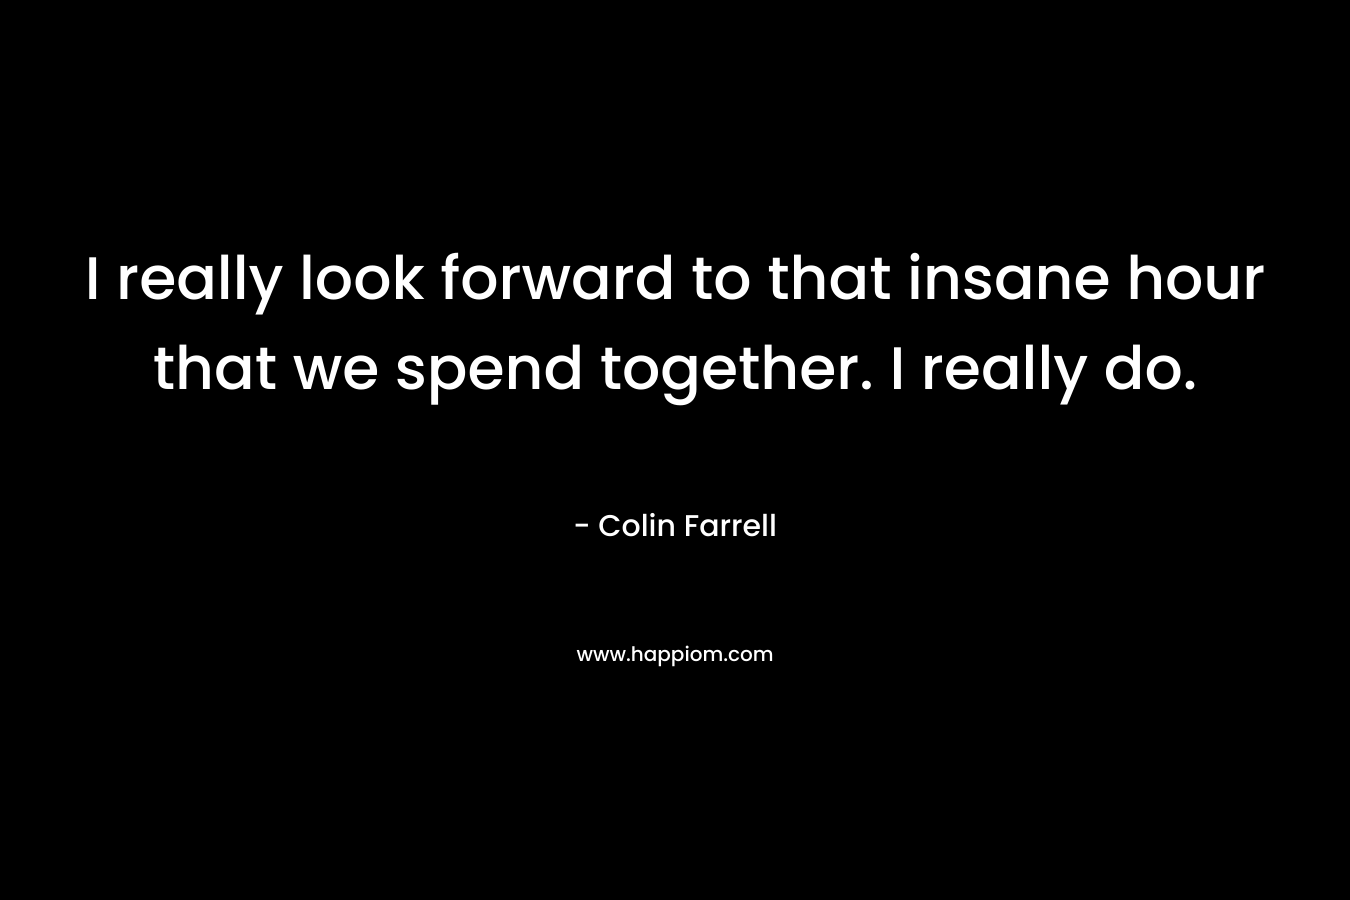 I really look forward to that insane hour that we spend together. I really do. – Colin Farrell